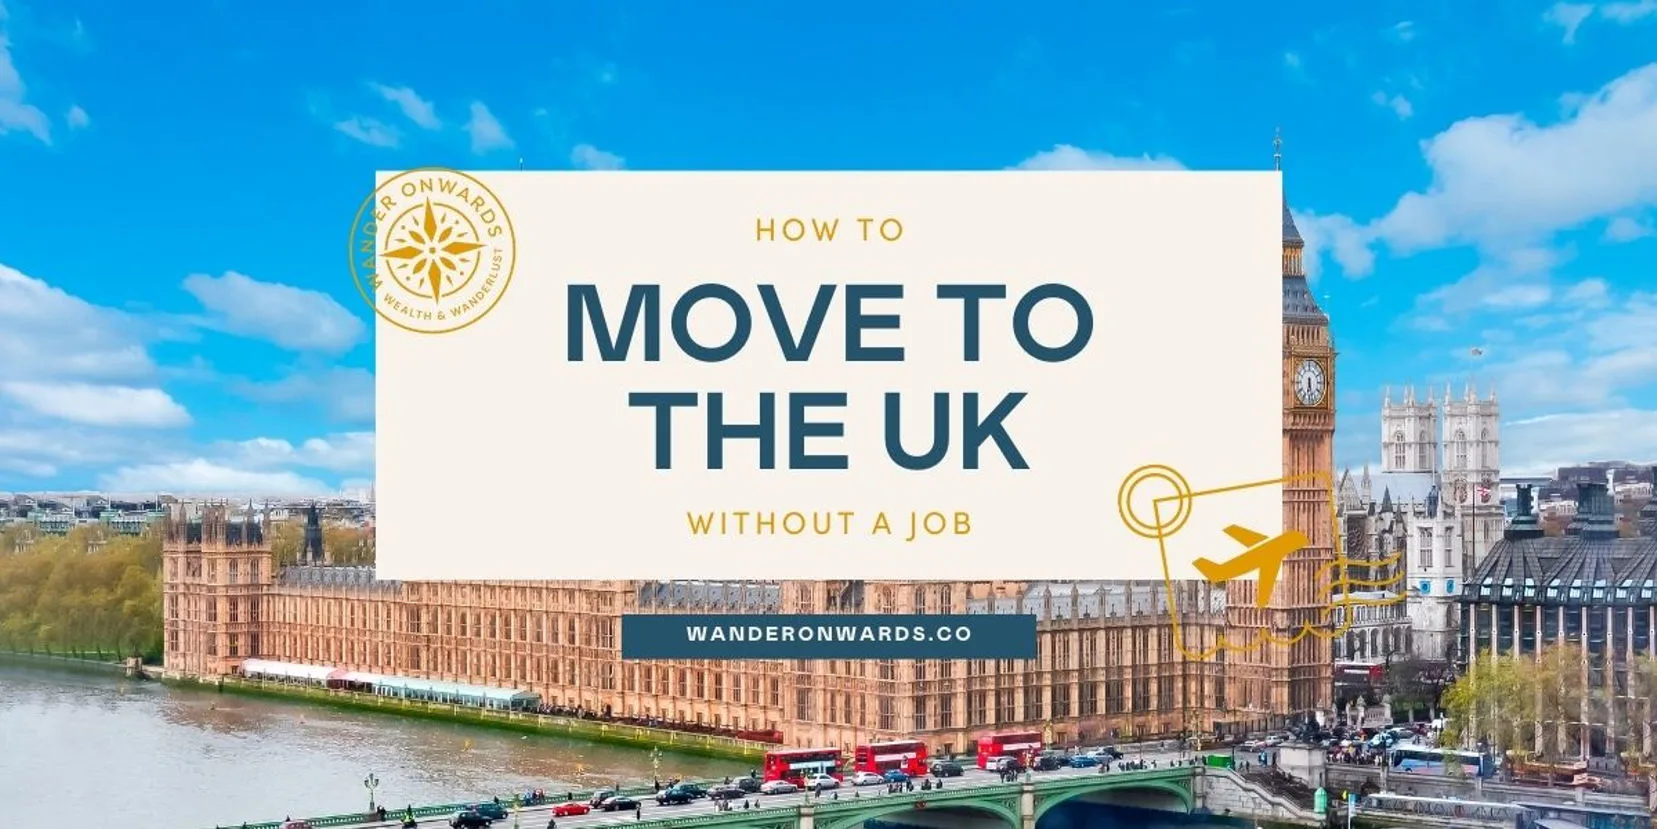 text says "How to move to the UK without a job"